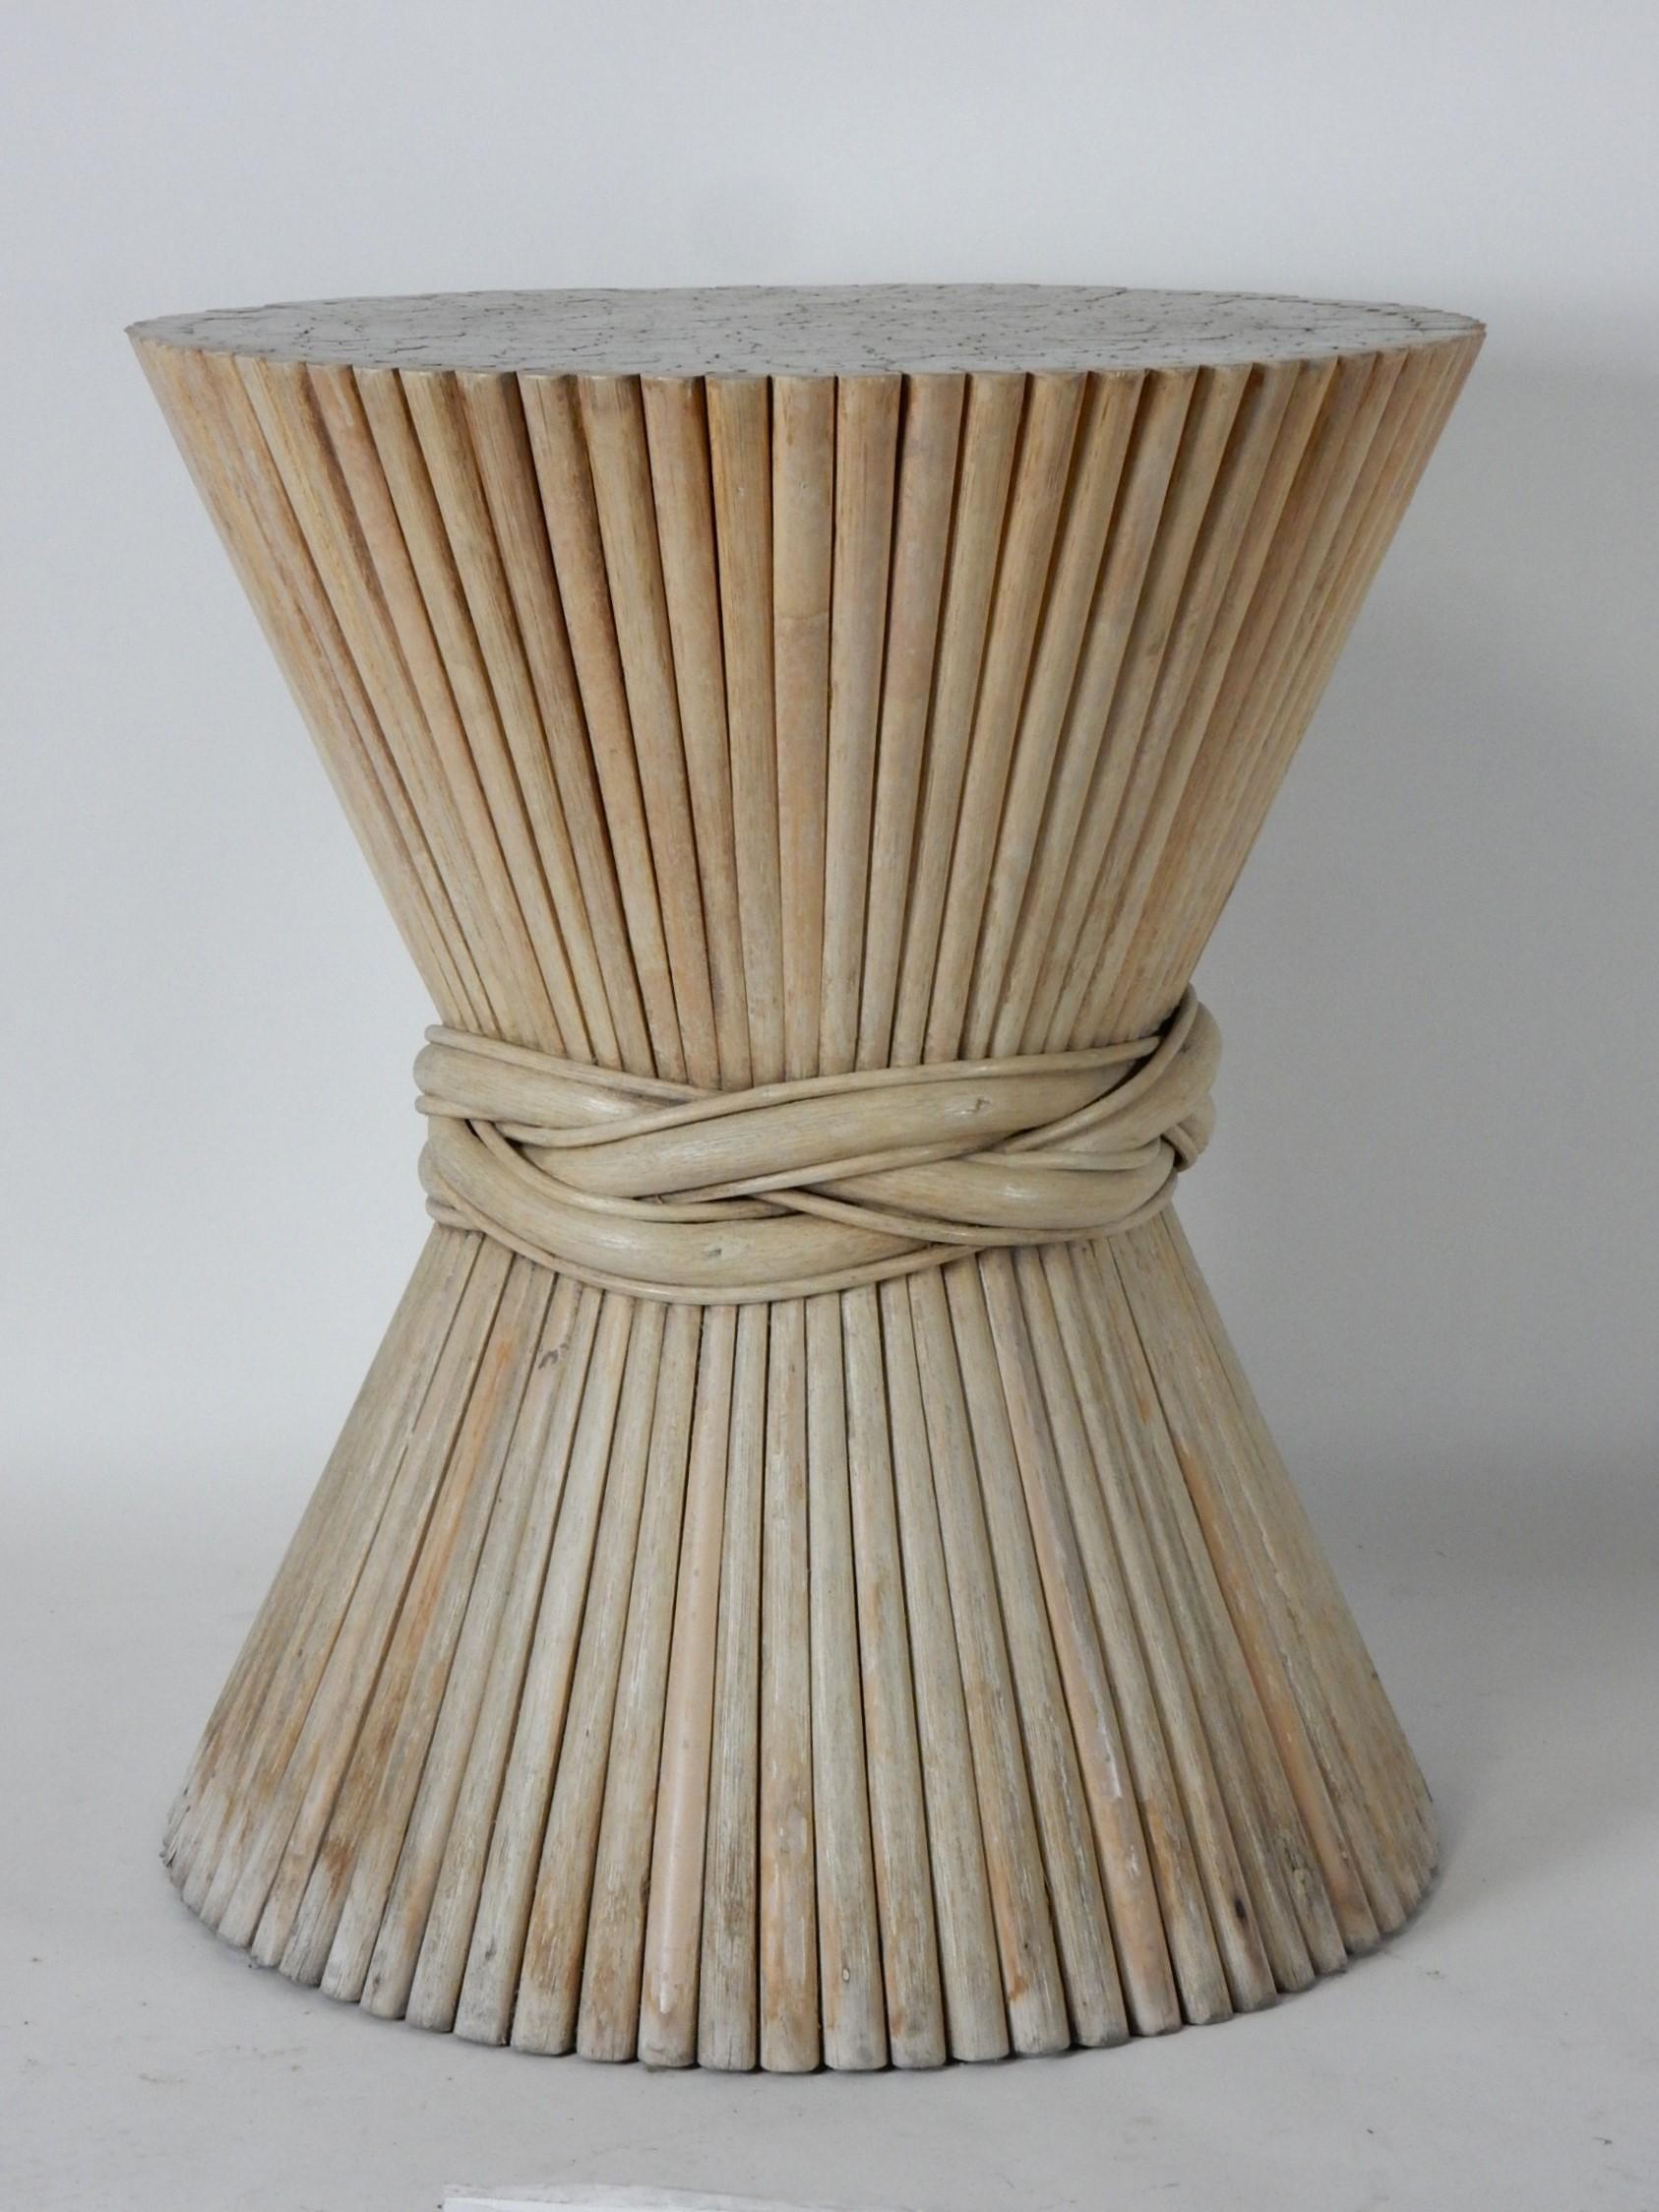 20th Century Sculpted Rattan Dining Table Base Pedestal circa 1960's For Sale